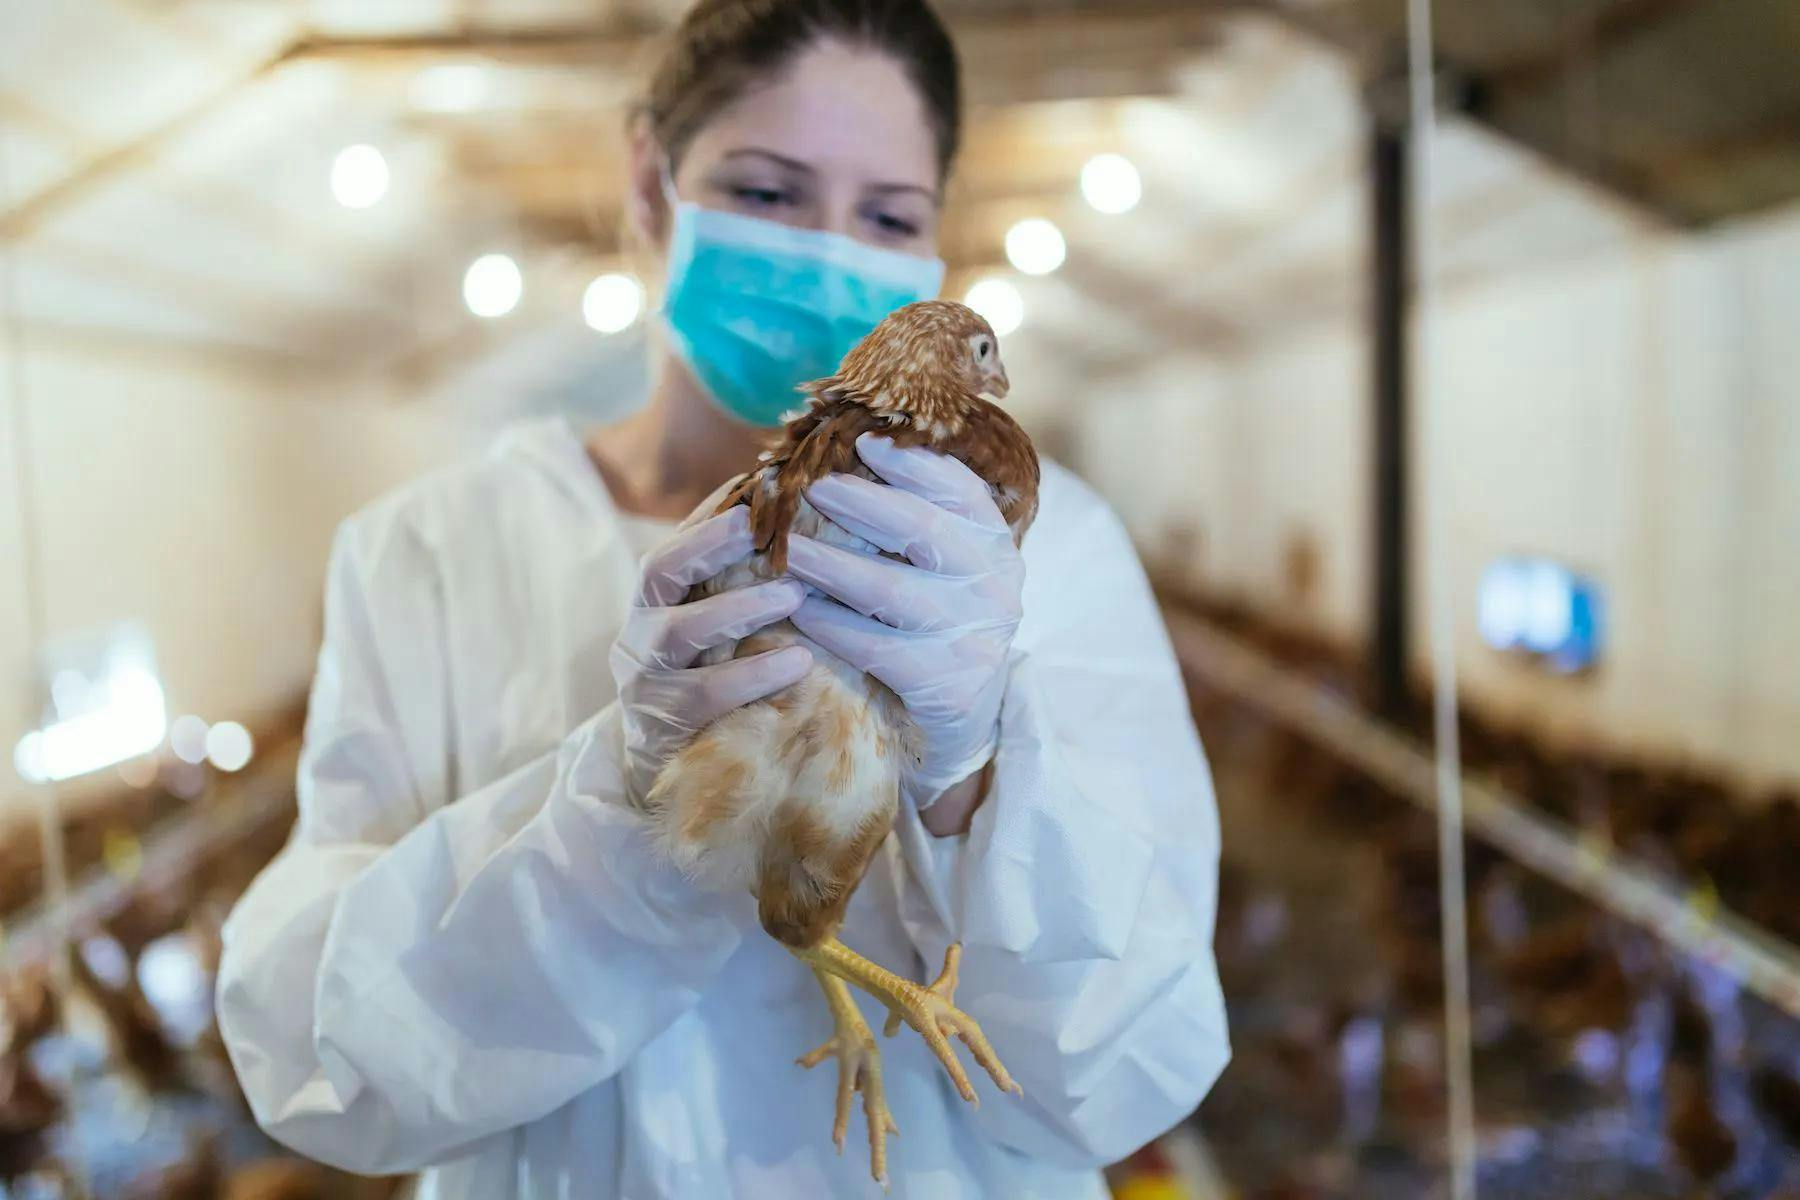 The first case of the H5N1 avian influenza strain was reported in a human in Texas, and public organizations are voicing their concerns over it. 

Image Credit: Hedgehog 94, Adobe Stock